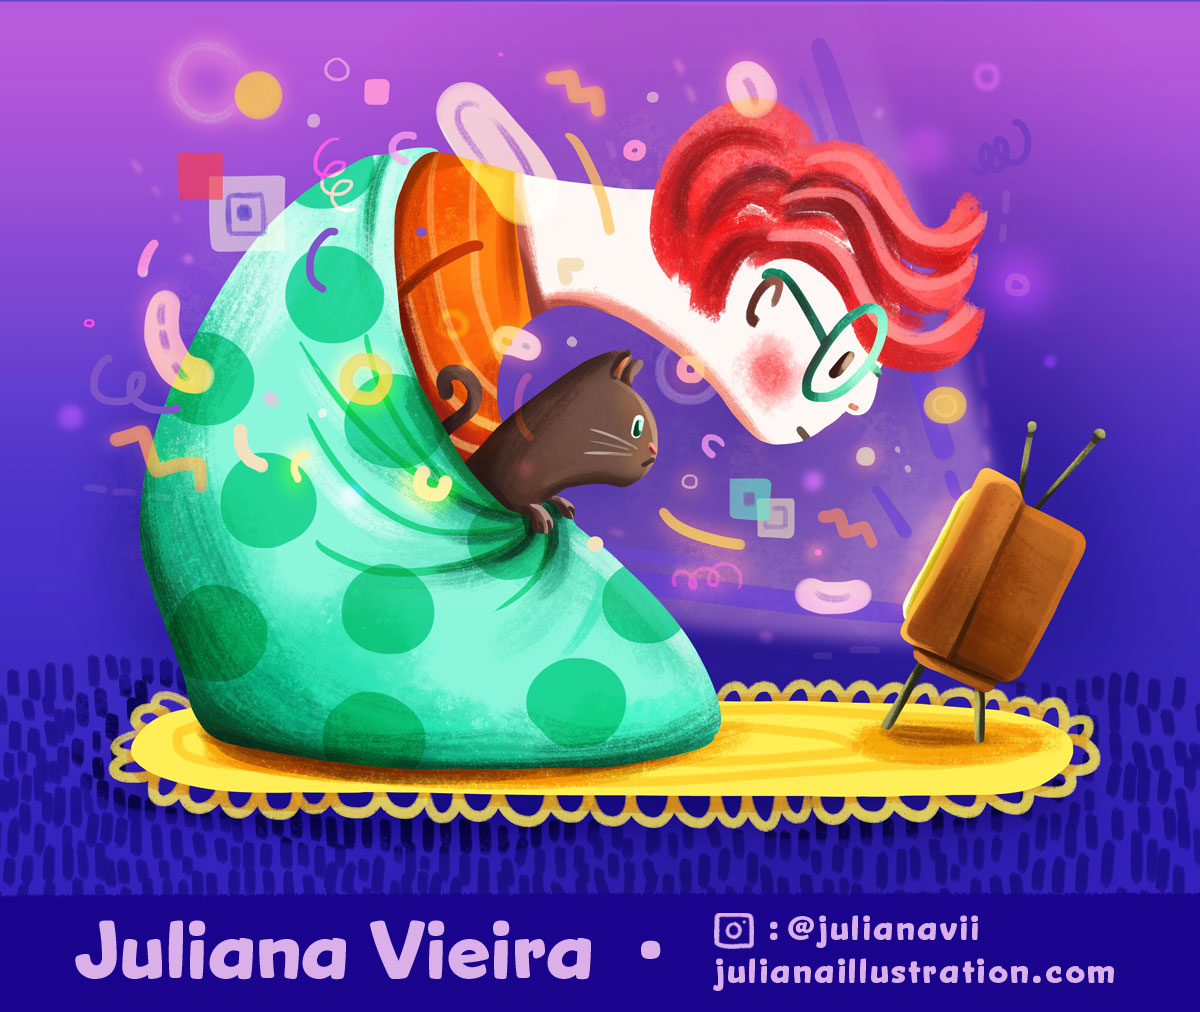 Happy September #KidLitArtPostcard !😊 My name is Juliana Vieira. I am an illustrator and designer from Canada. I would love to work on editorial and book projects! Portfolio: julianaillustration.com #kidlit #kidlitart #illustration #cat #comforter